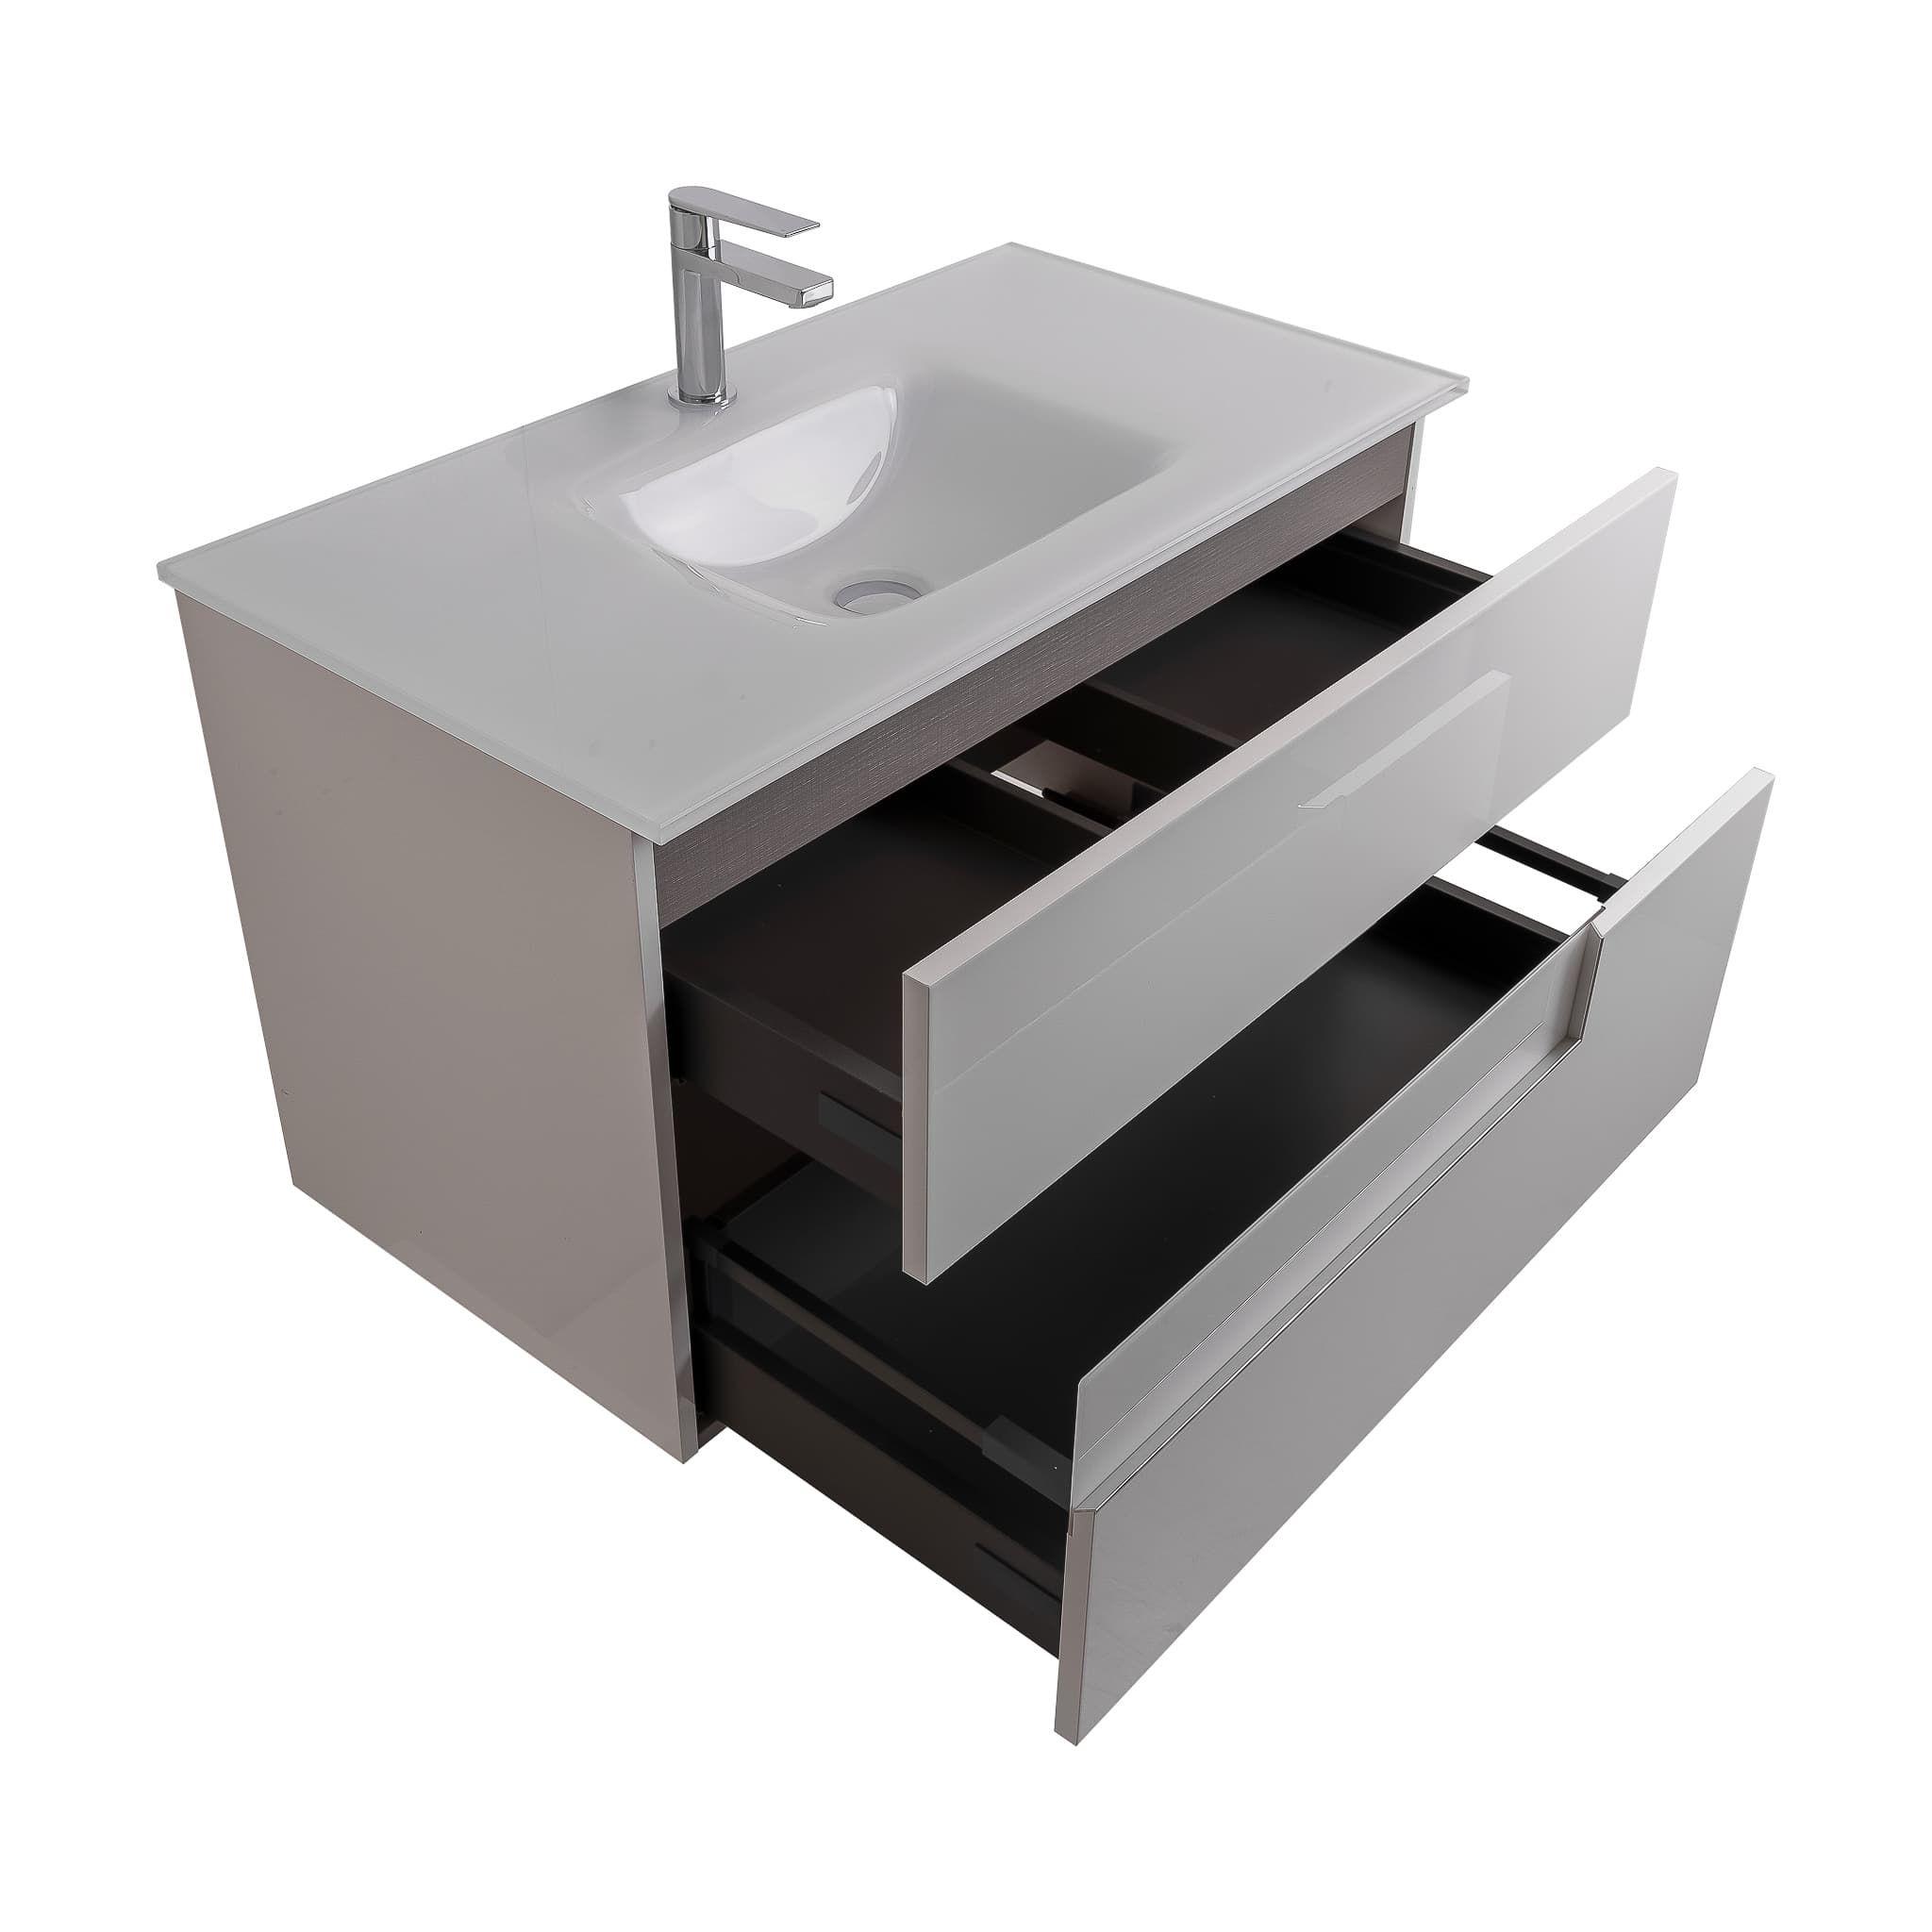 Vision 35.5 White High Gloss Cabinet, White Tempered Glass Sink, Wall Mounted Modern Vanity Set